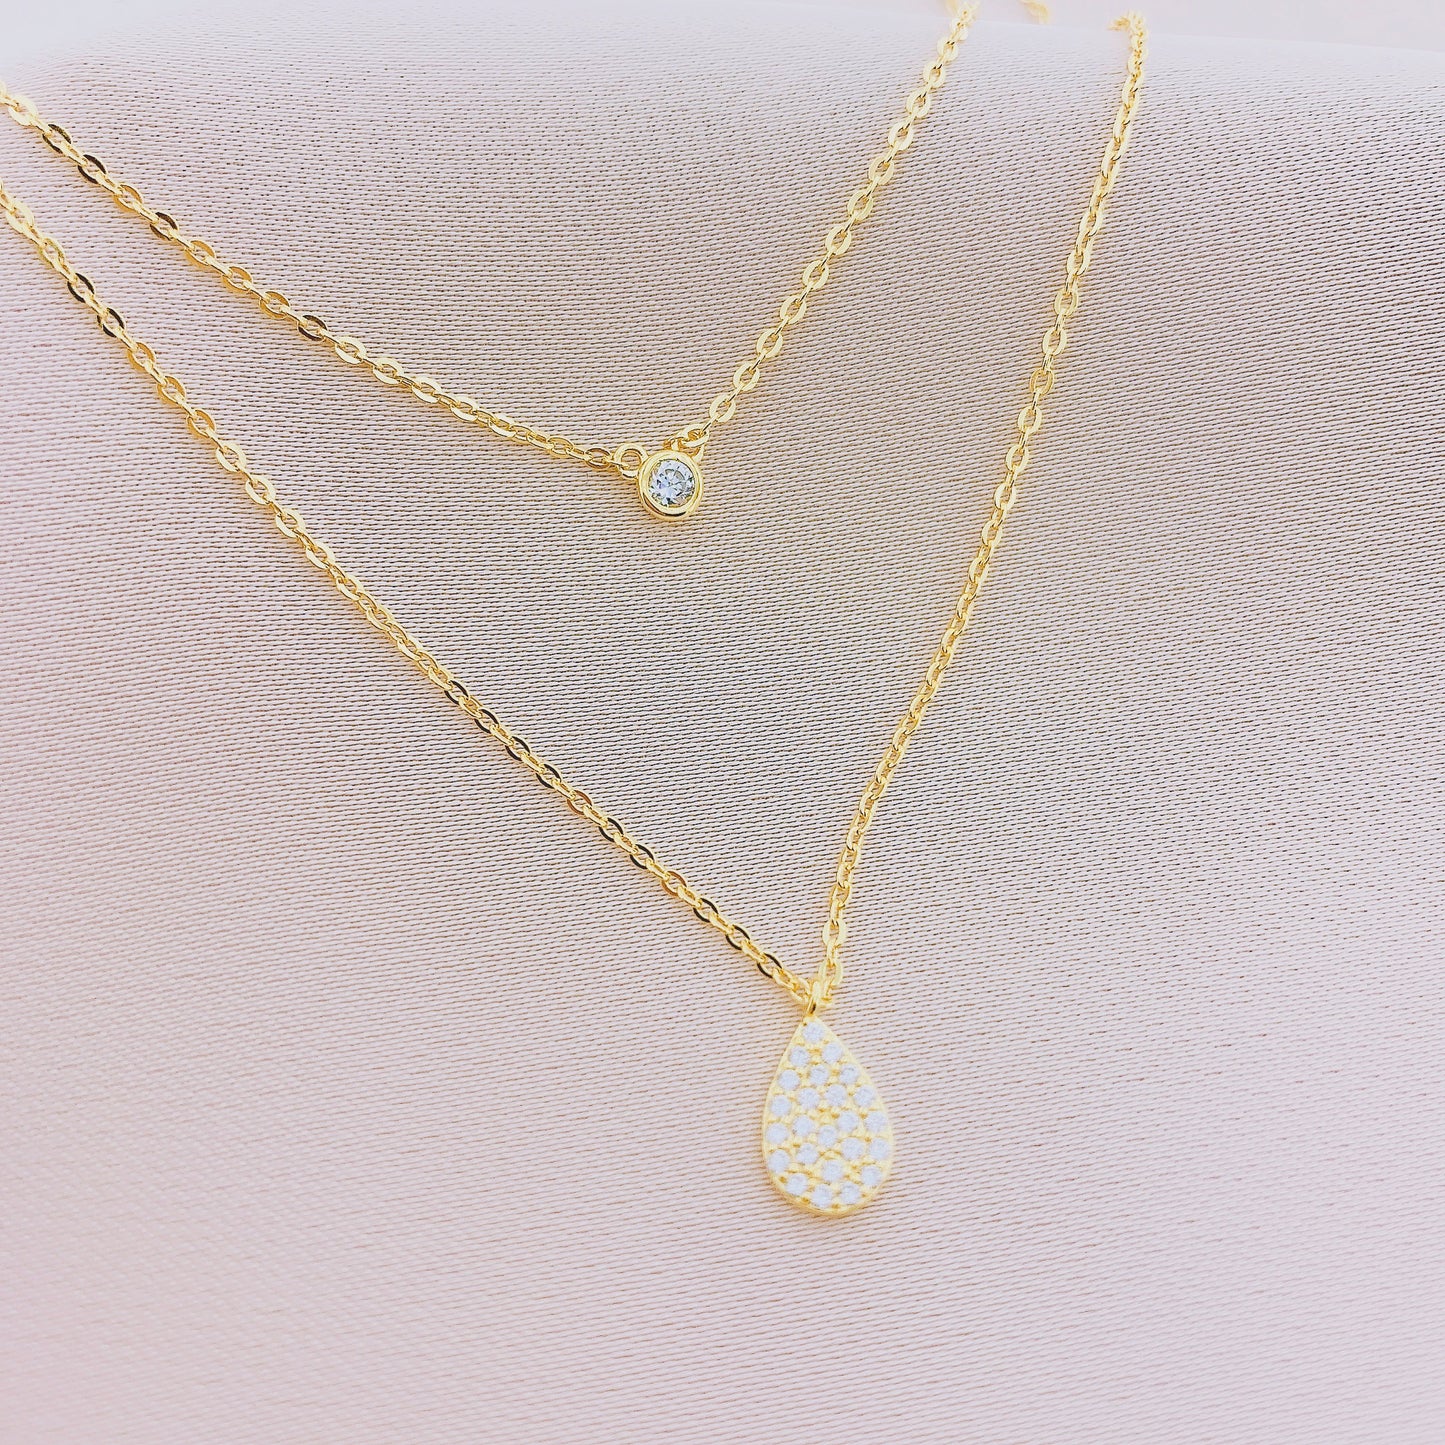 925 Silver Double Layered CZ Necklace